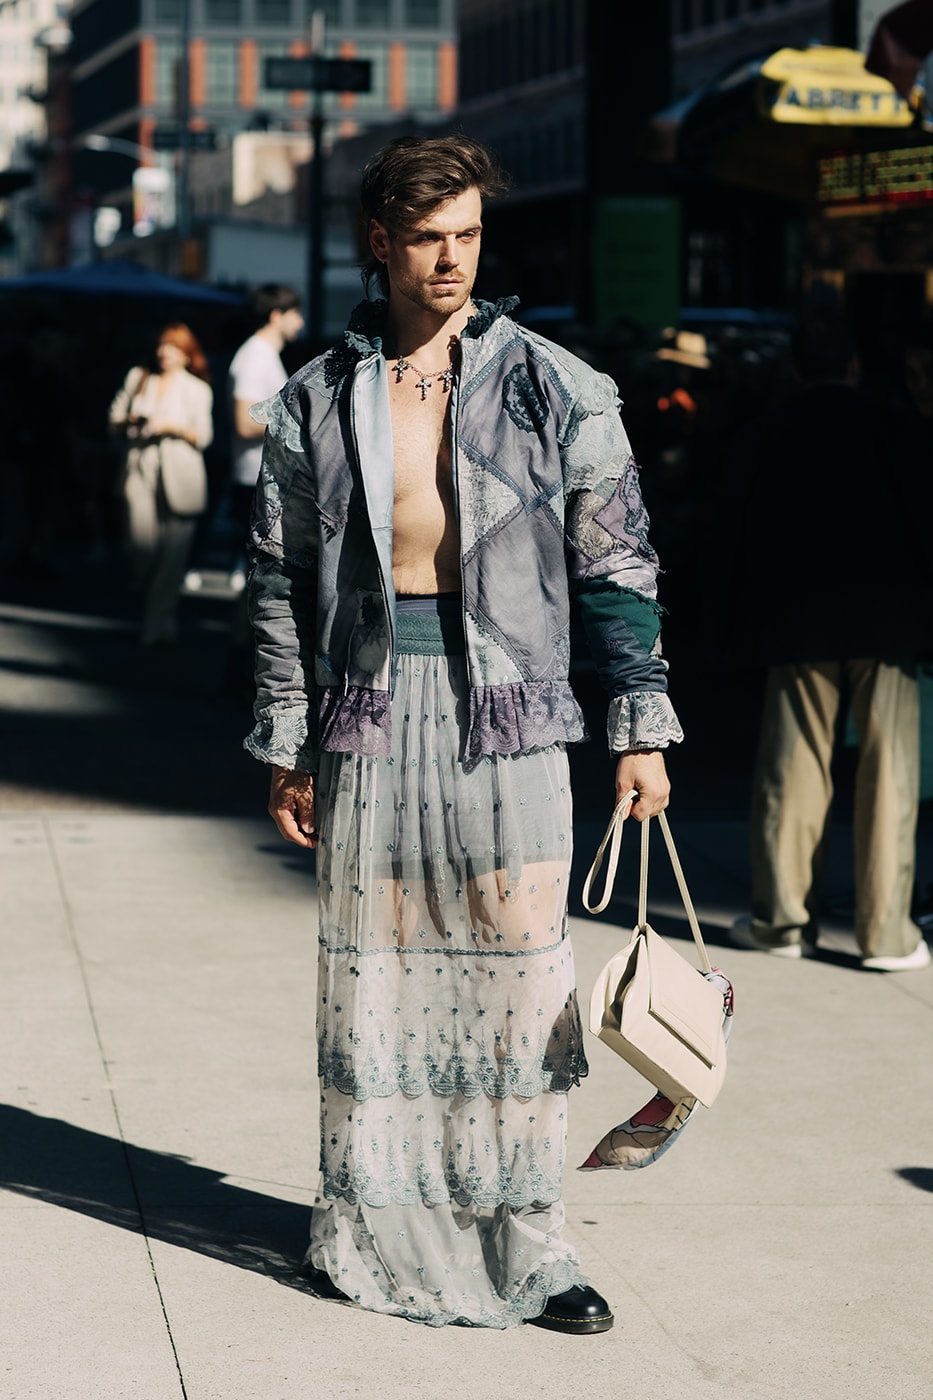 The Best Street Style from New York Fashion Week: Men's